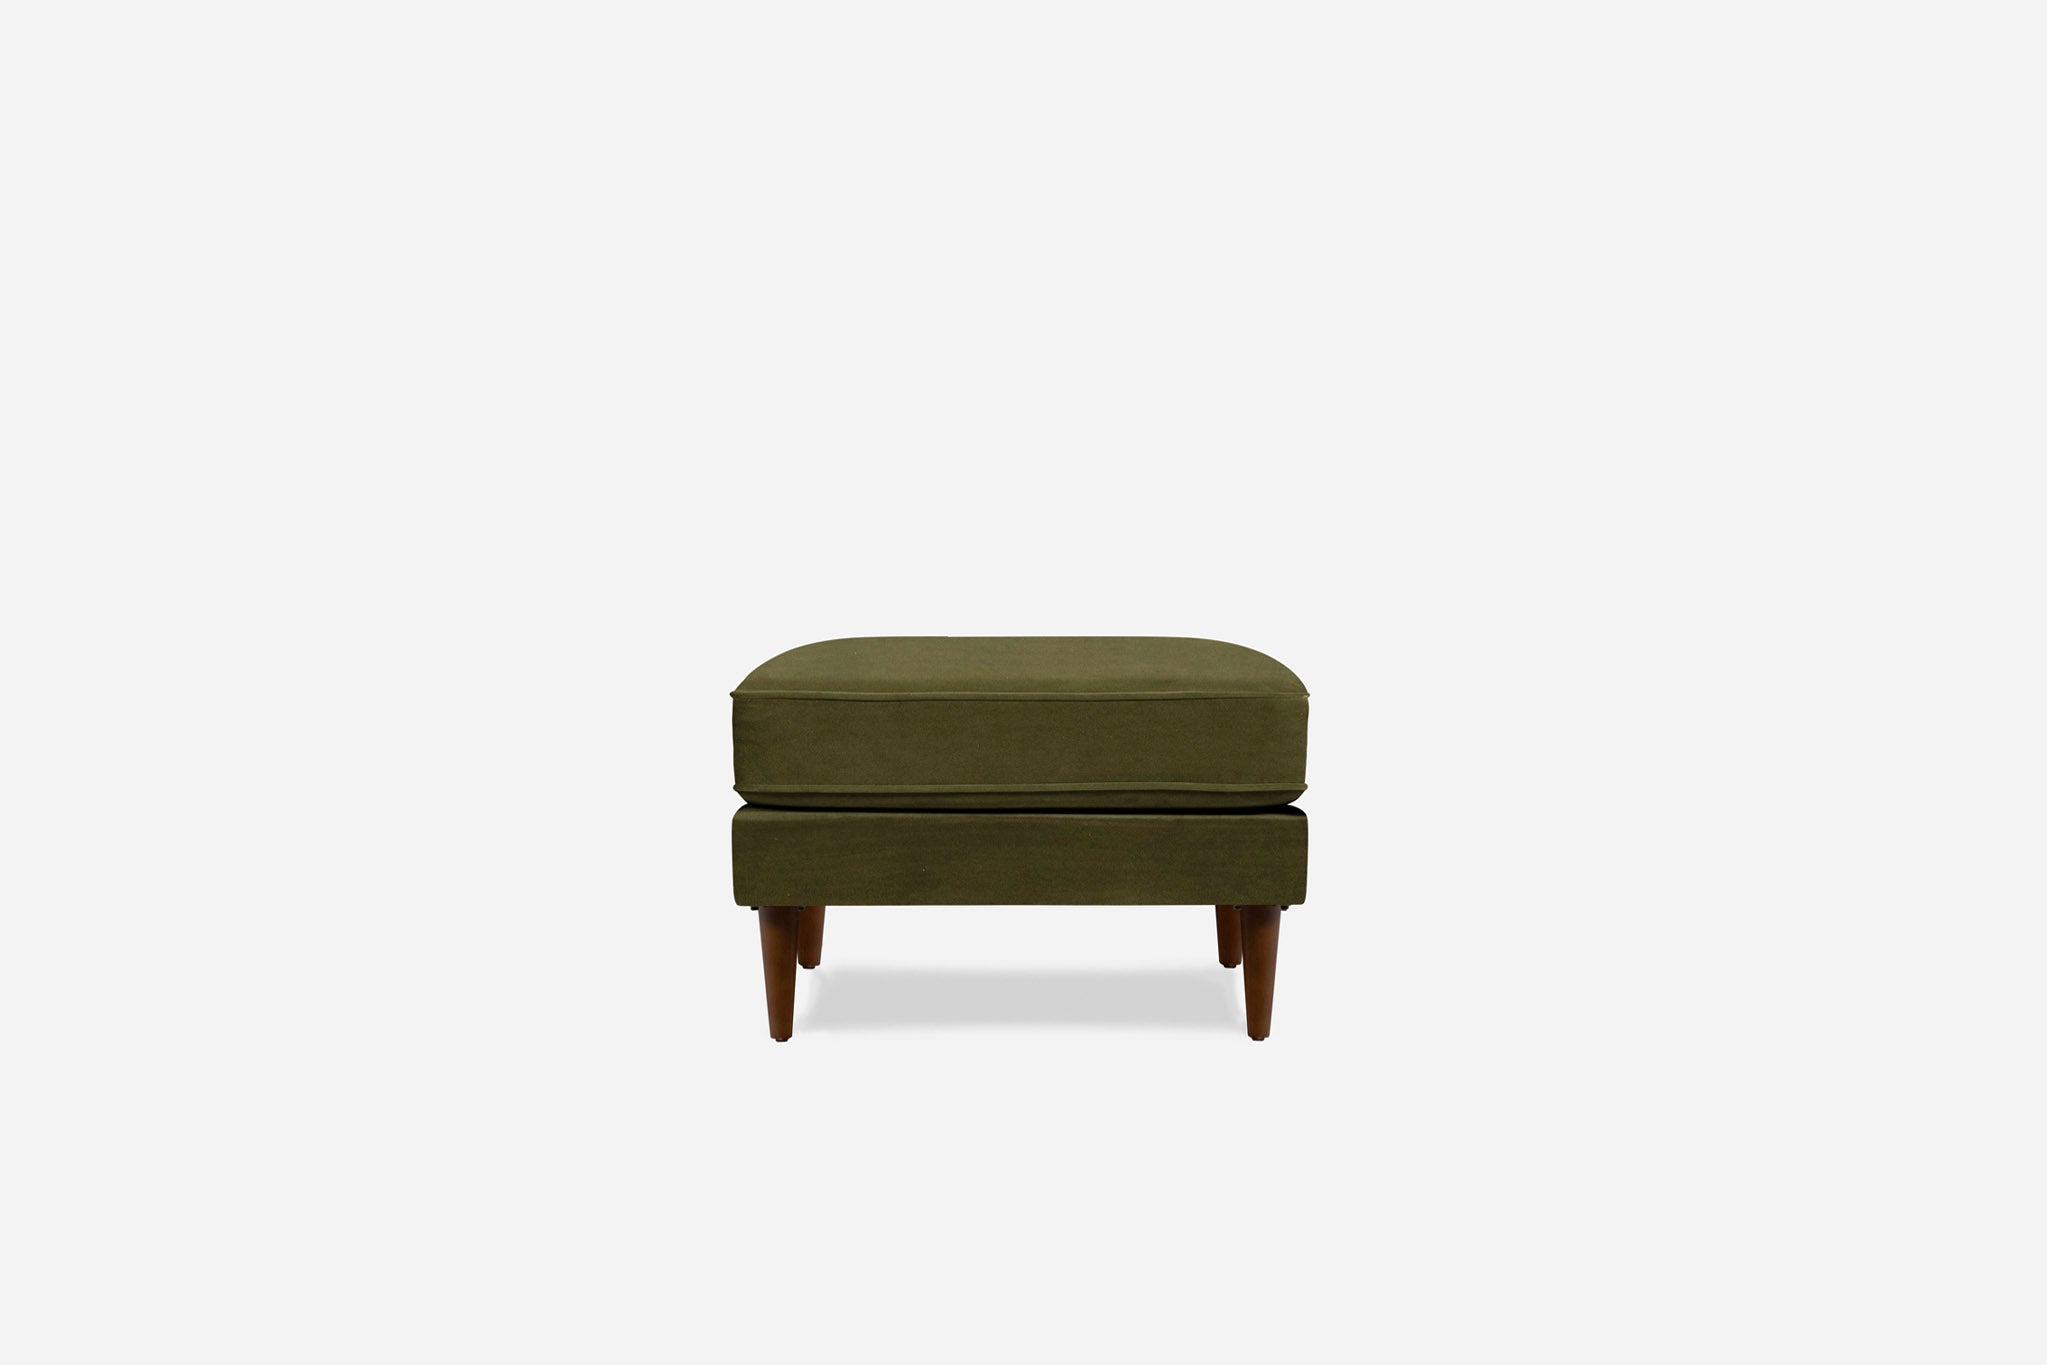 albany ottoman shown in olive velvet with walnut legs